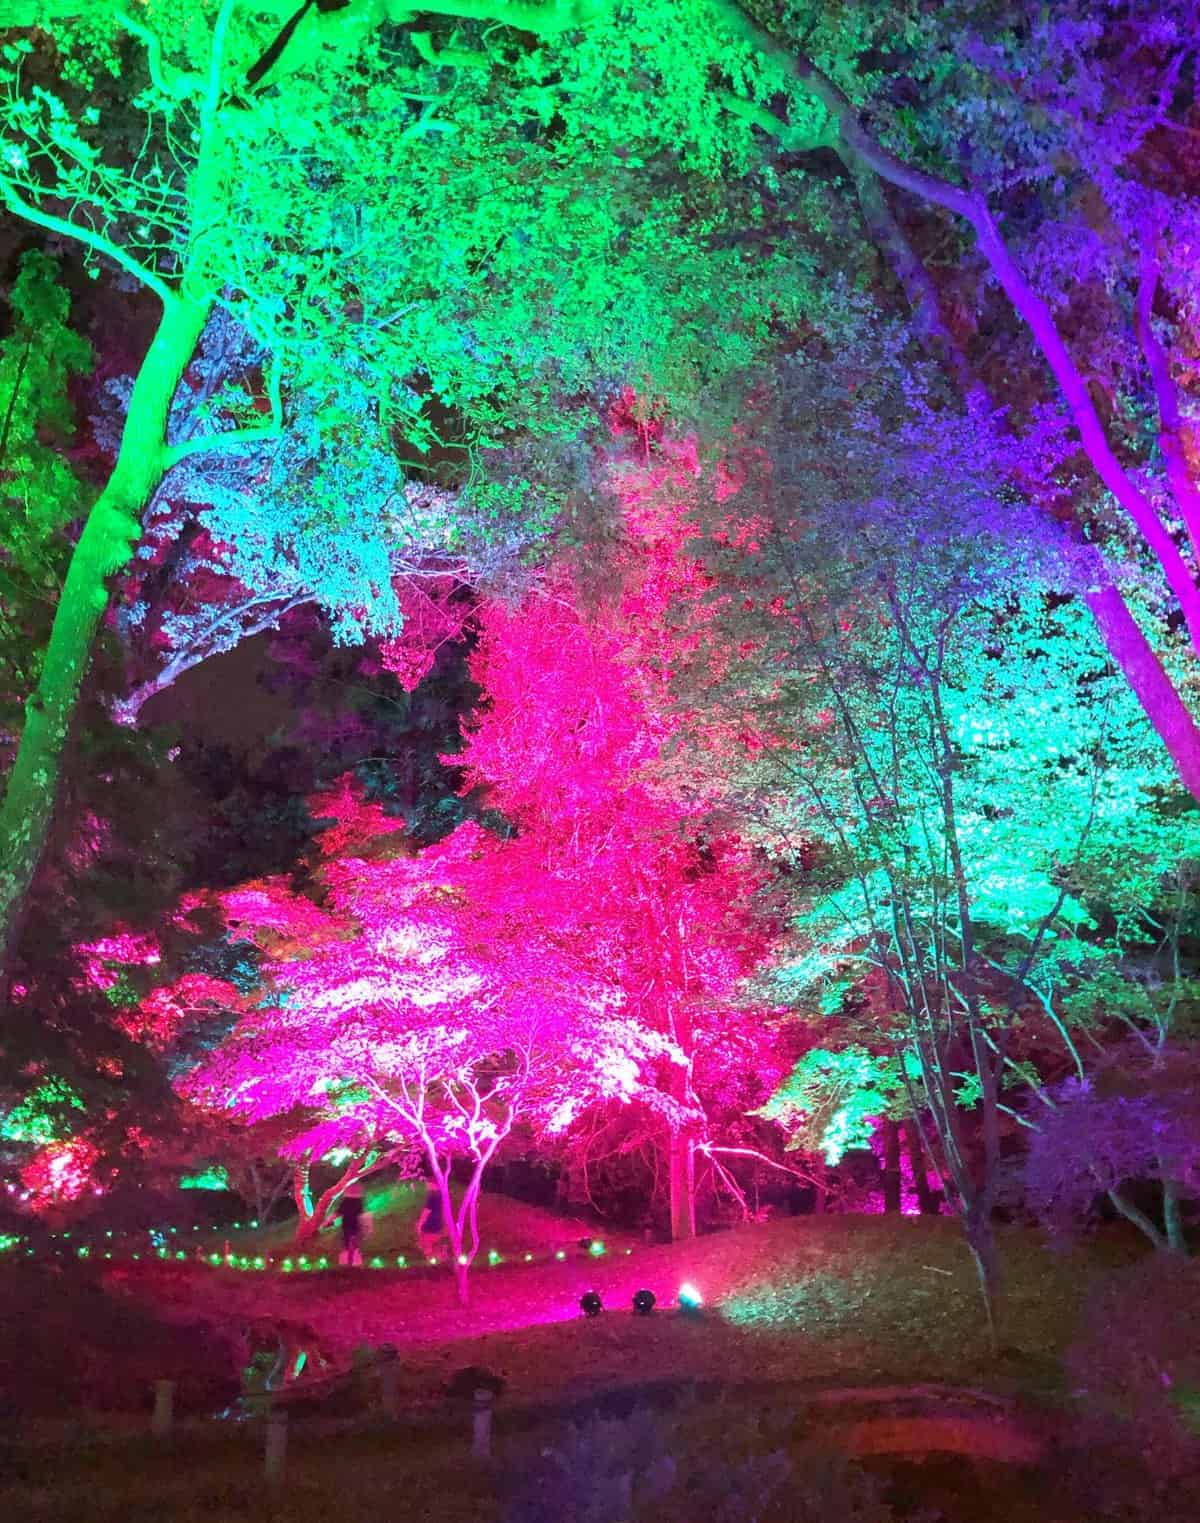 Maymont's 6th Annual Garden Glow! Enjoying RVA and all it has to offer!